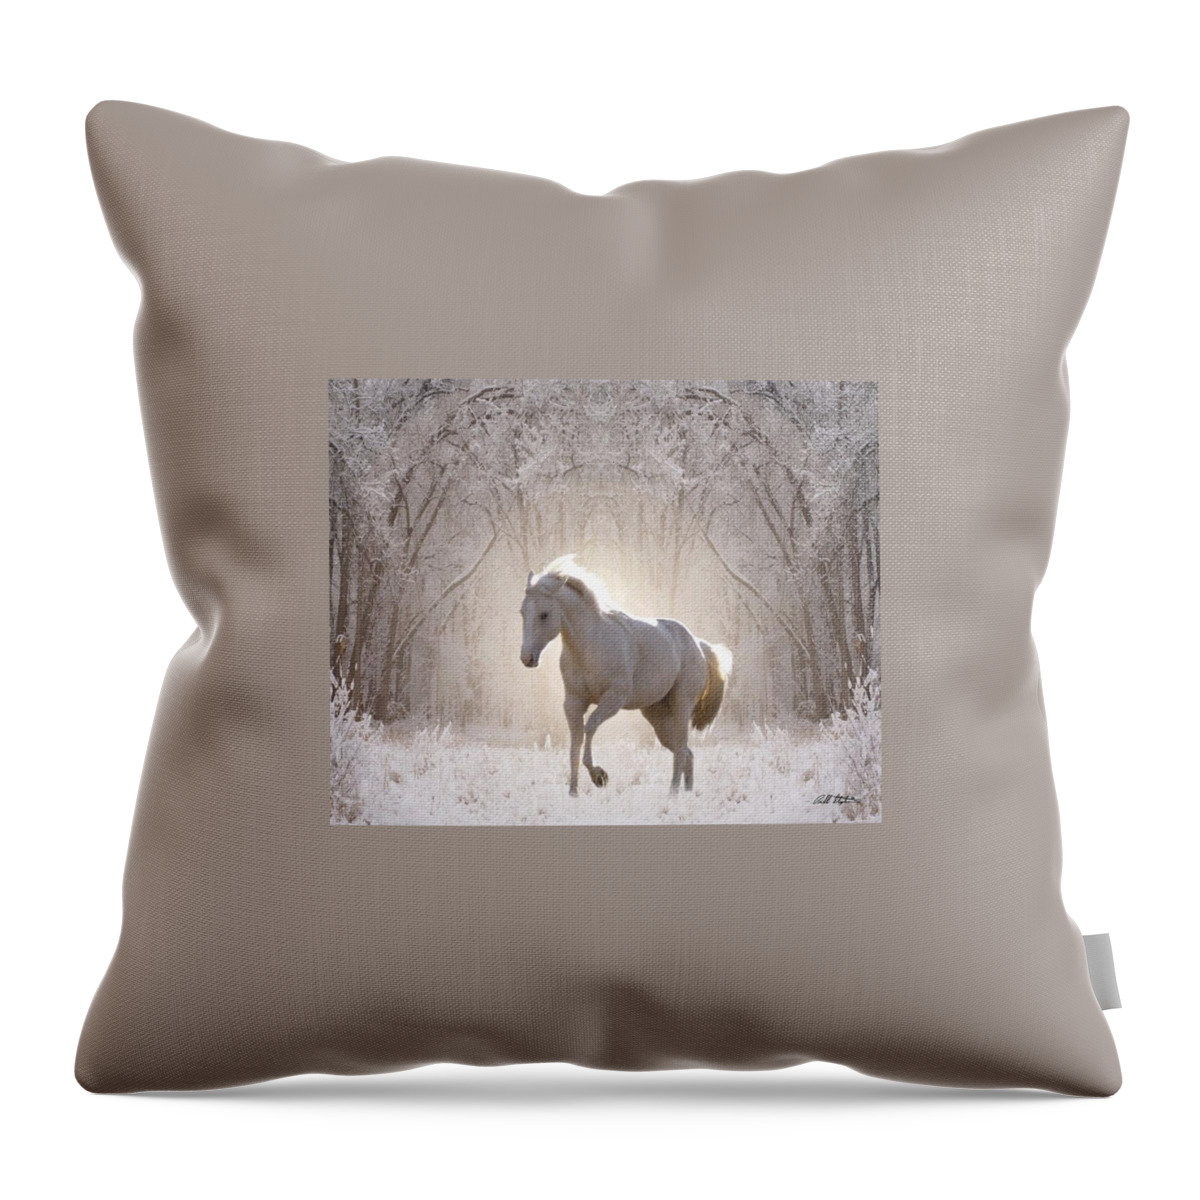 Horses Throw Pillow featuring the digital art Snow White by Bill Stephens